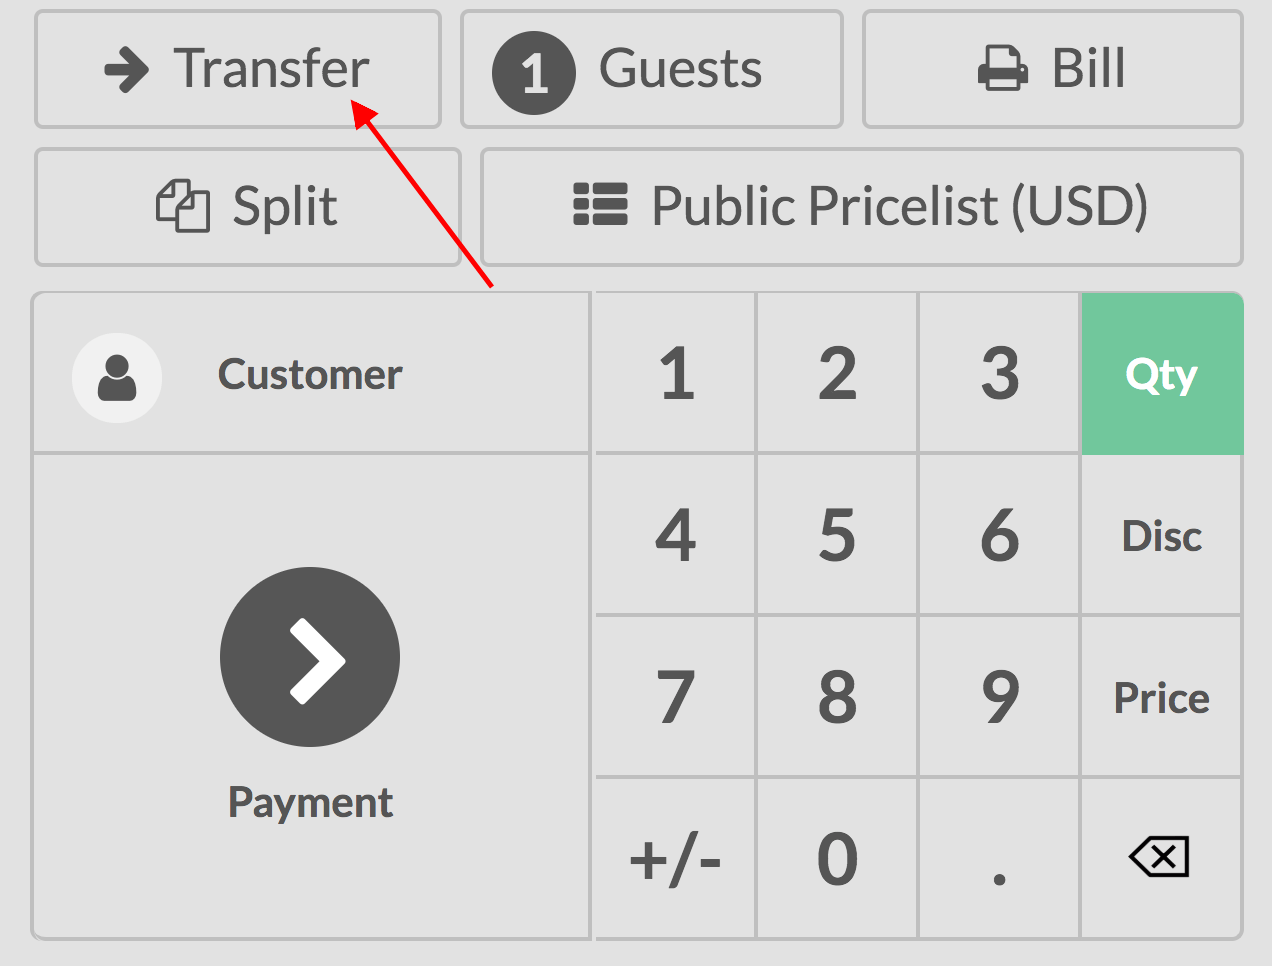 View of the pos interface and transfer button. How to transfer customers from one table to another